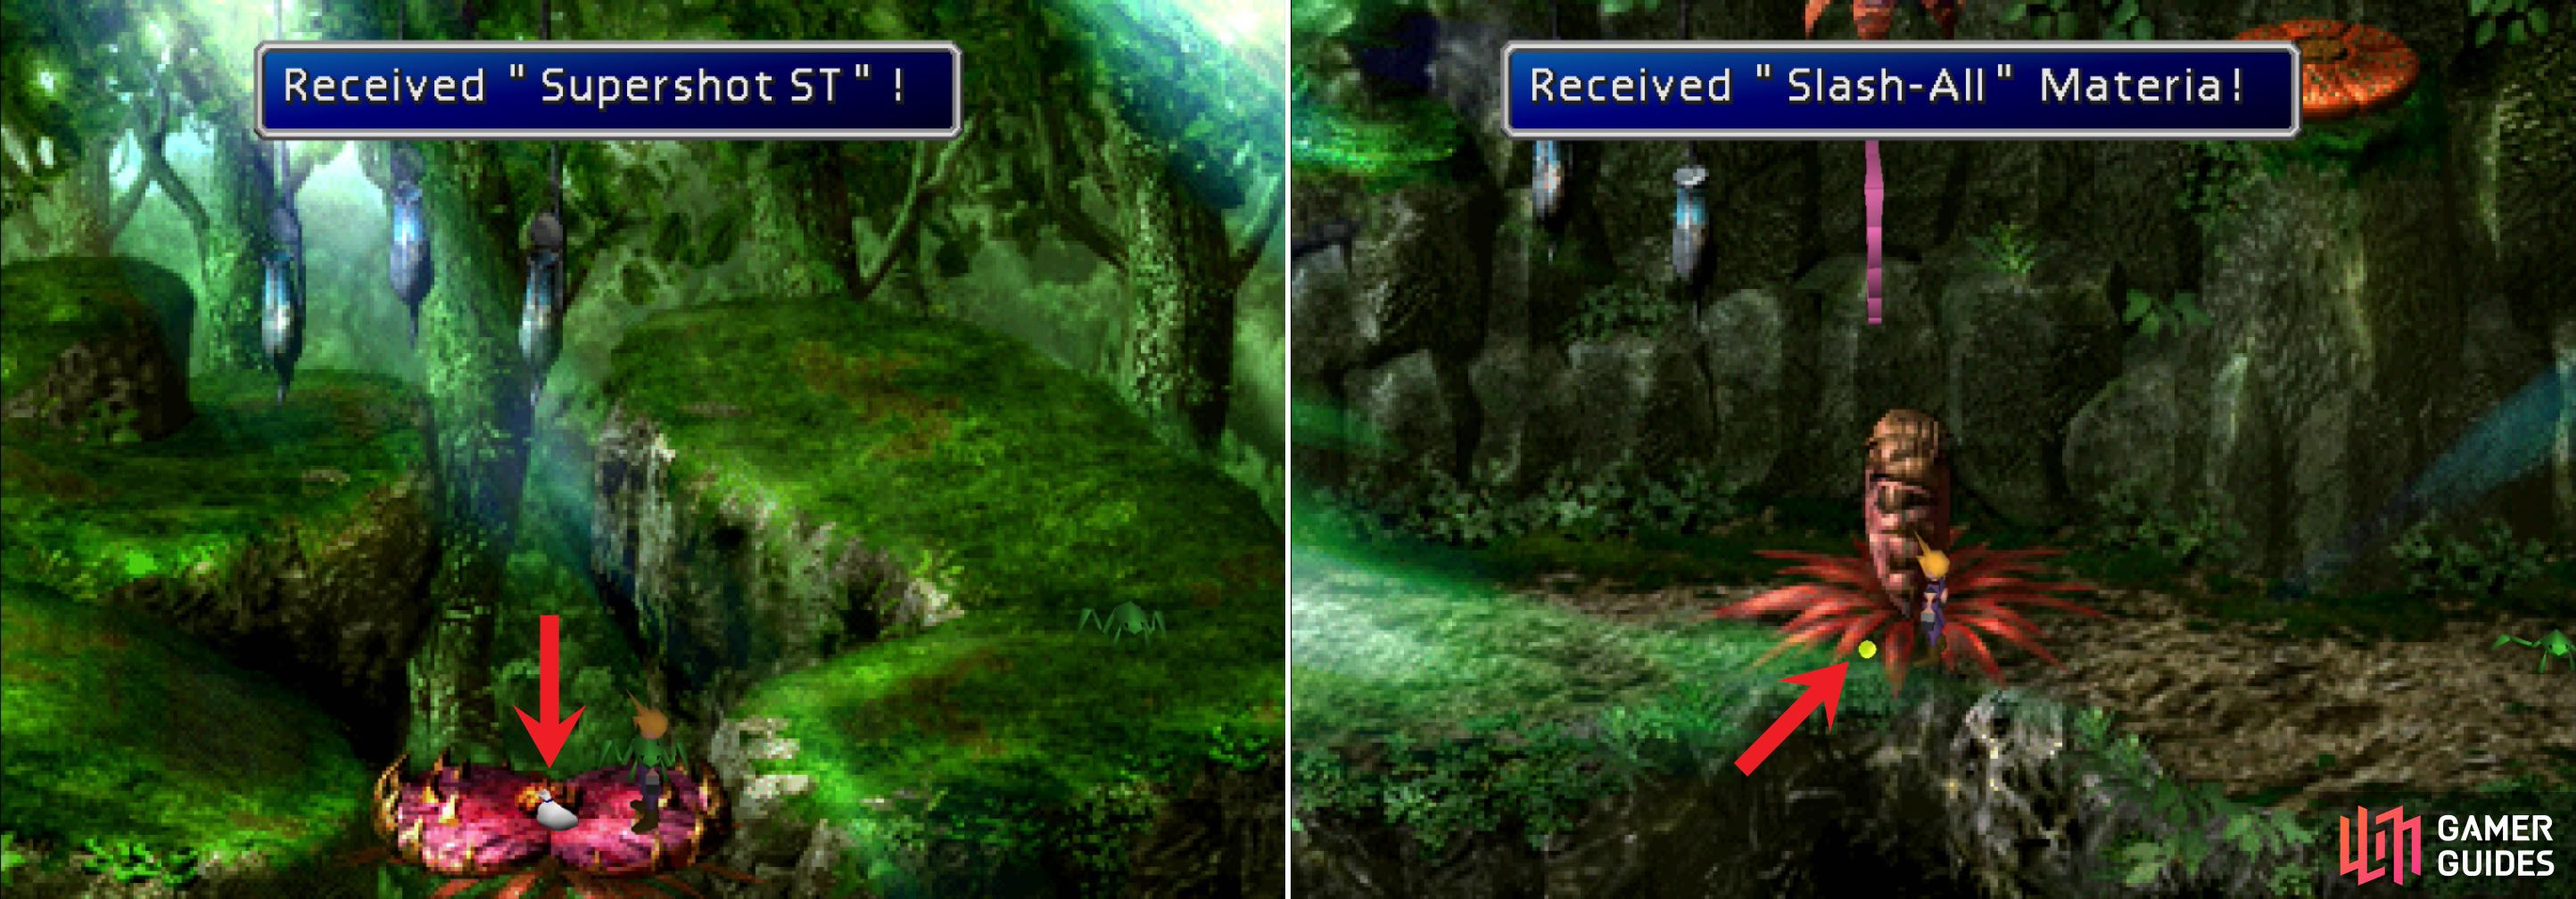 Swap a frog while standing on the carnivorous plant to score the Supershot ST (left). Use a beehive to satiate the carnivorous plant, which will allow you to grab the Slash-All Materia (right).